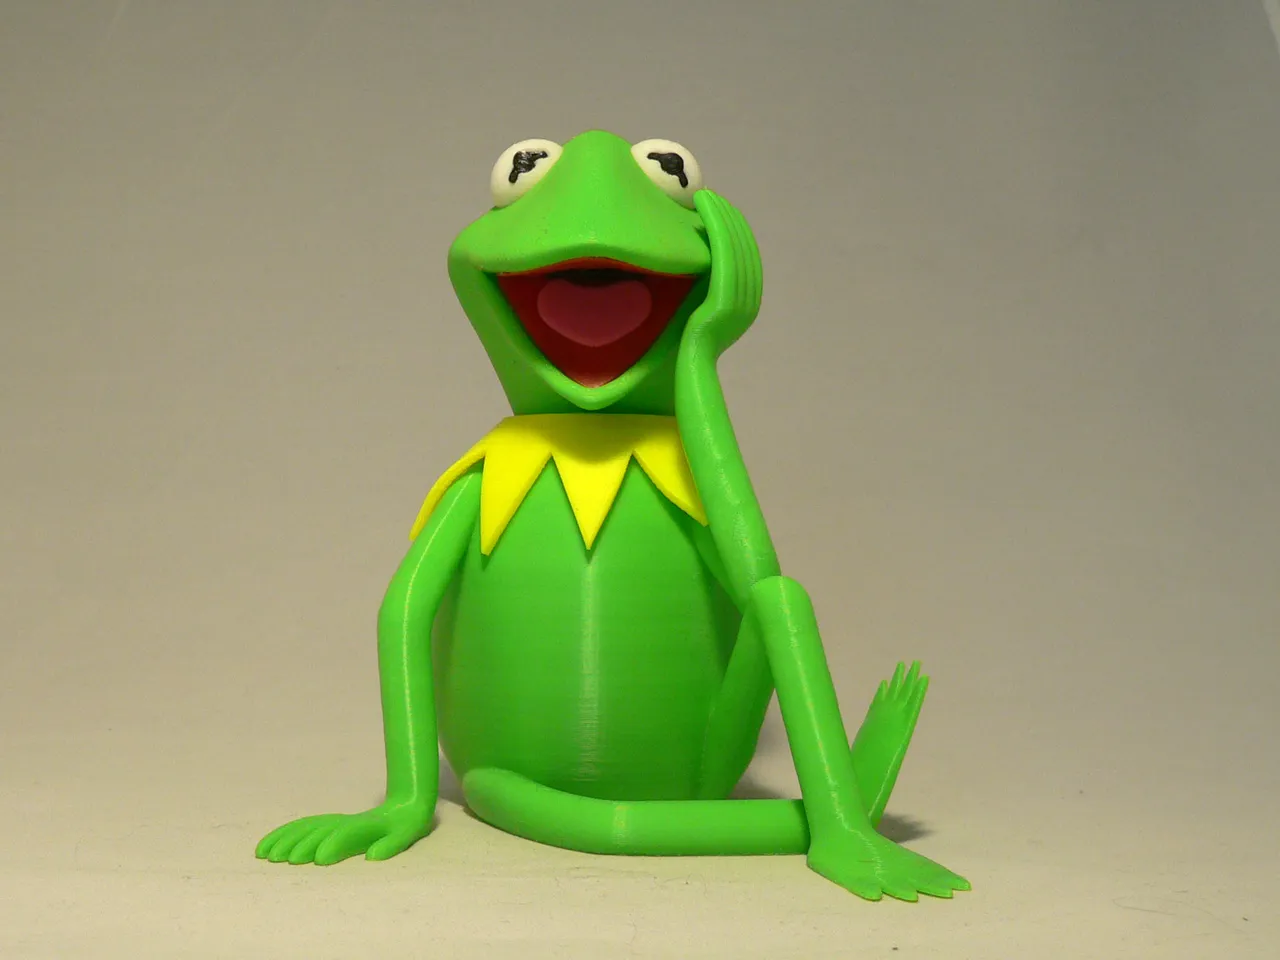 Why did Kermit fall from the roof? 